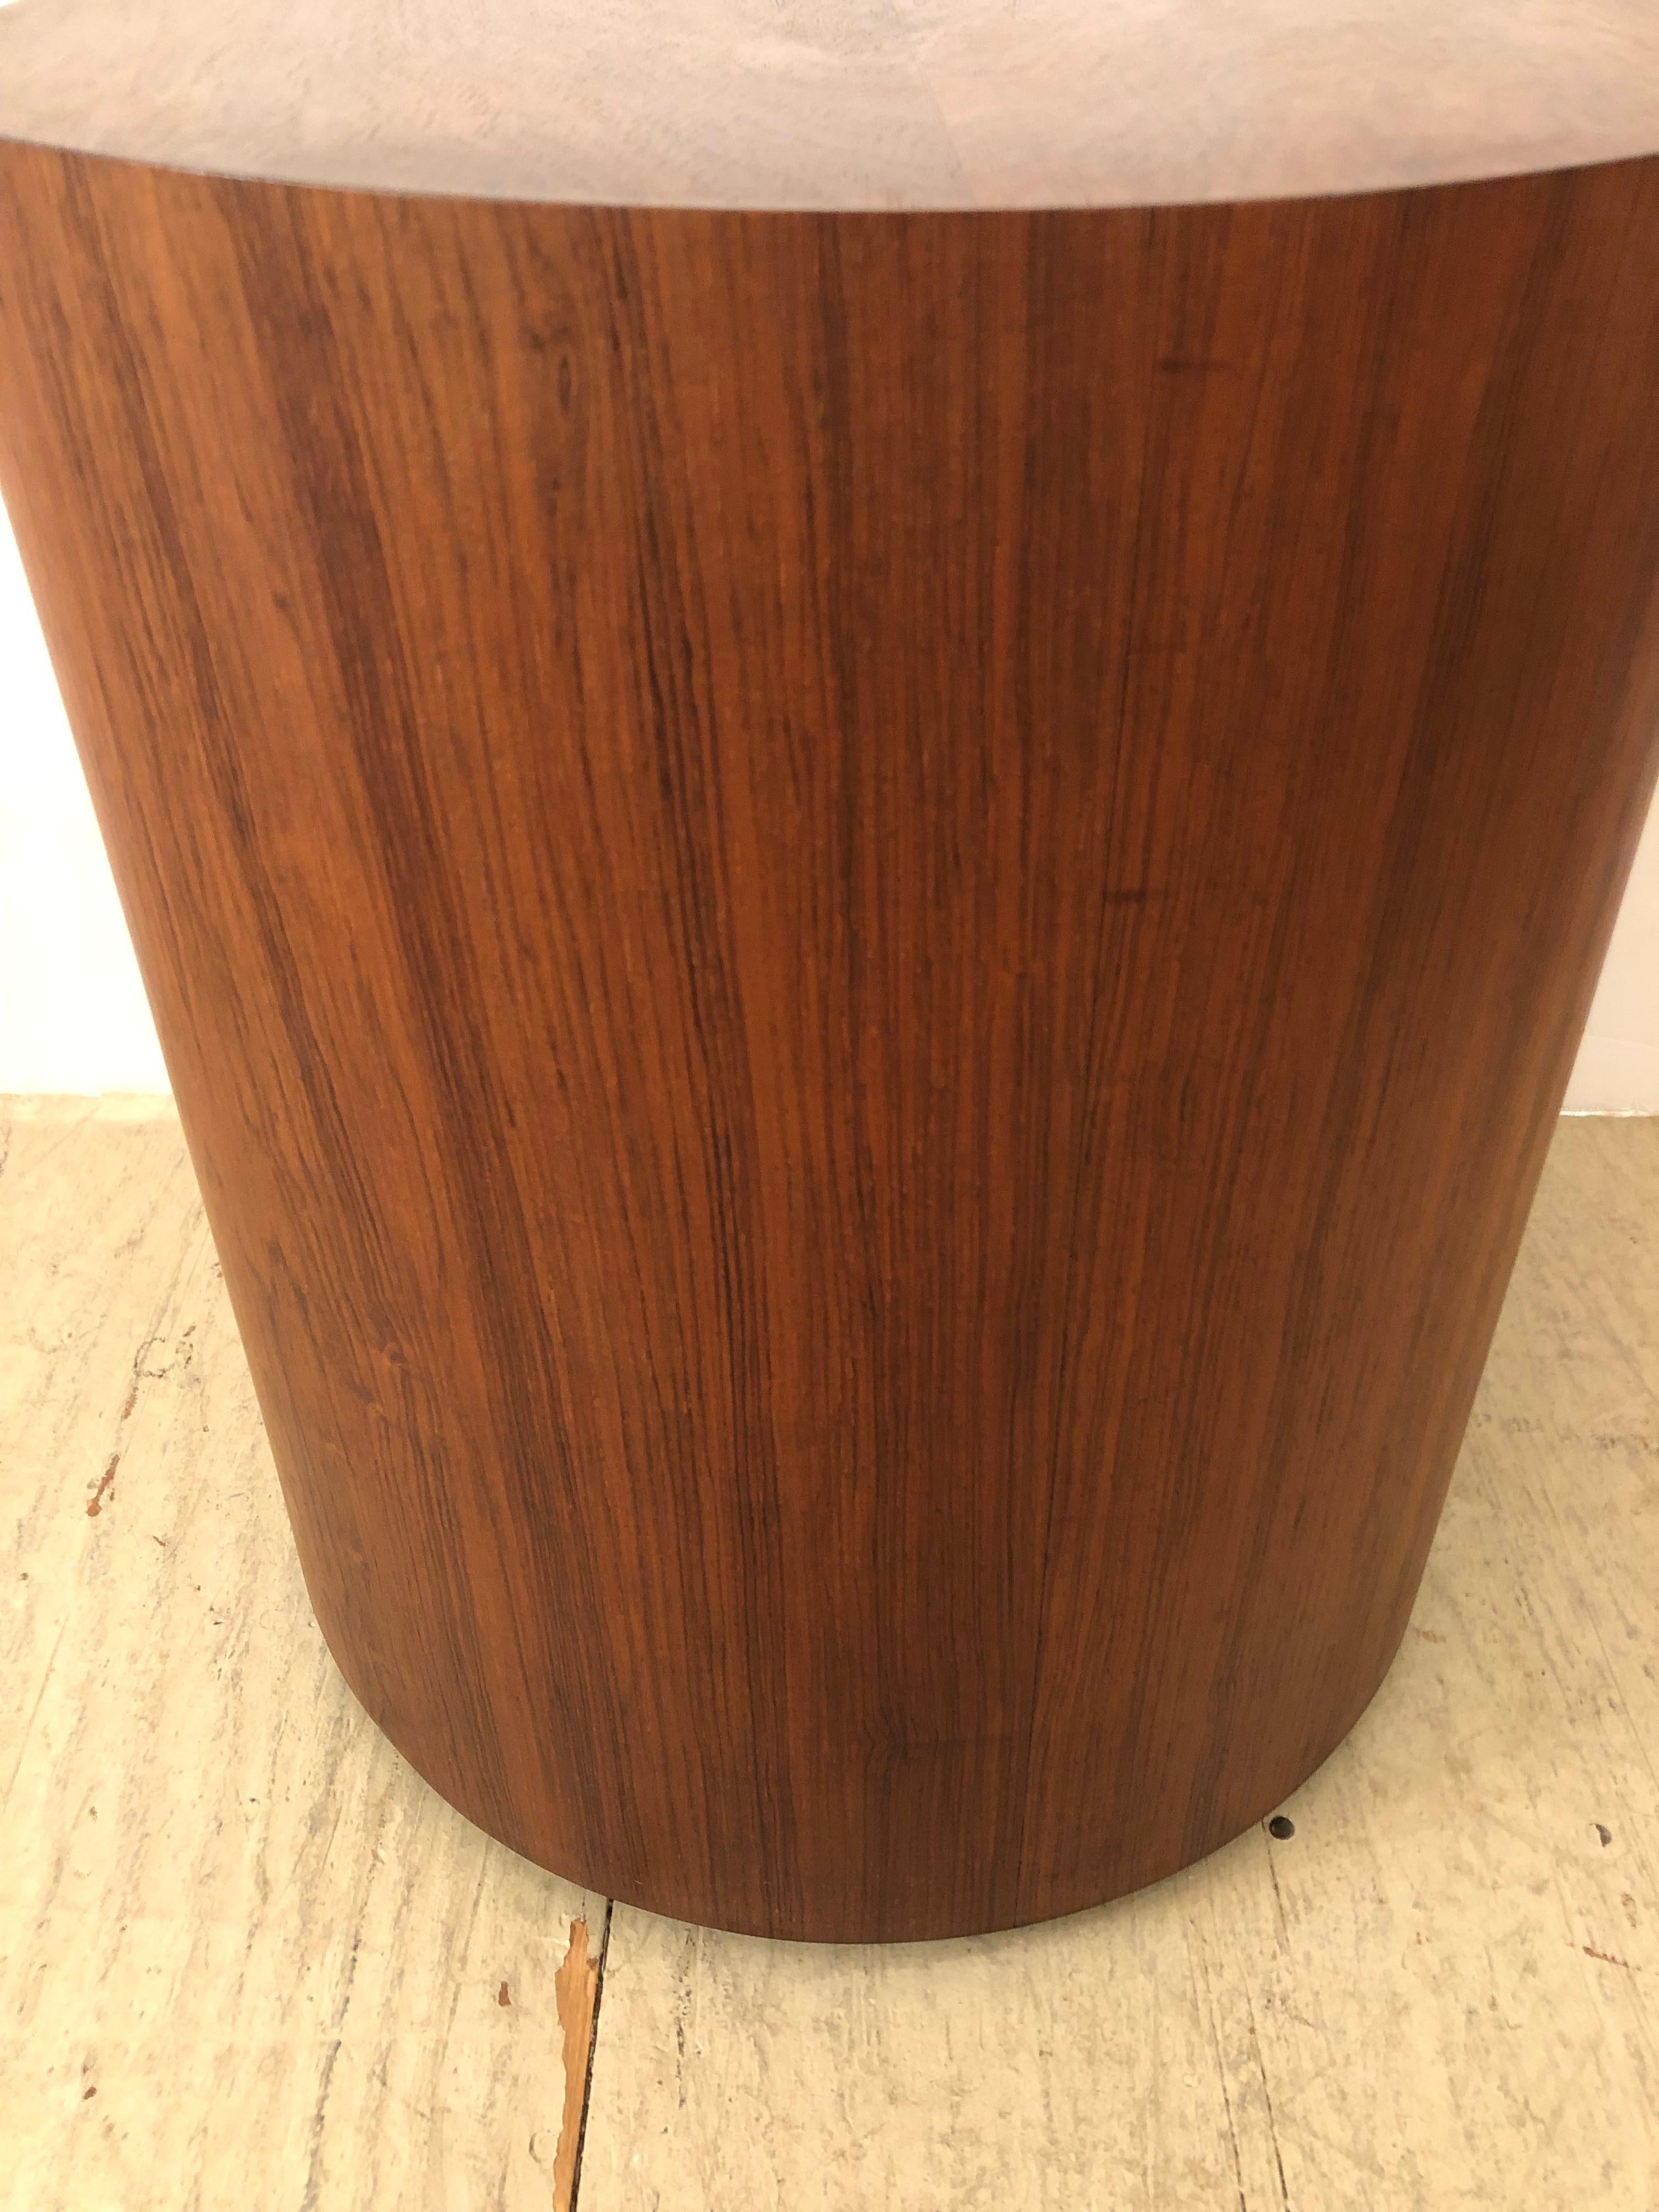 Stunning versatile cylindrical drum shaped end table having gorgeous grain in it's rosewood veneer. Hollow so not very heavy.